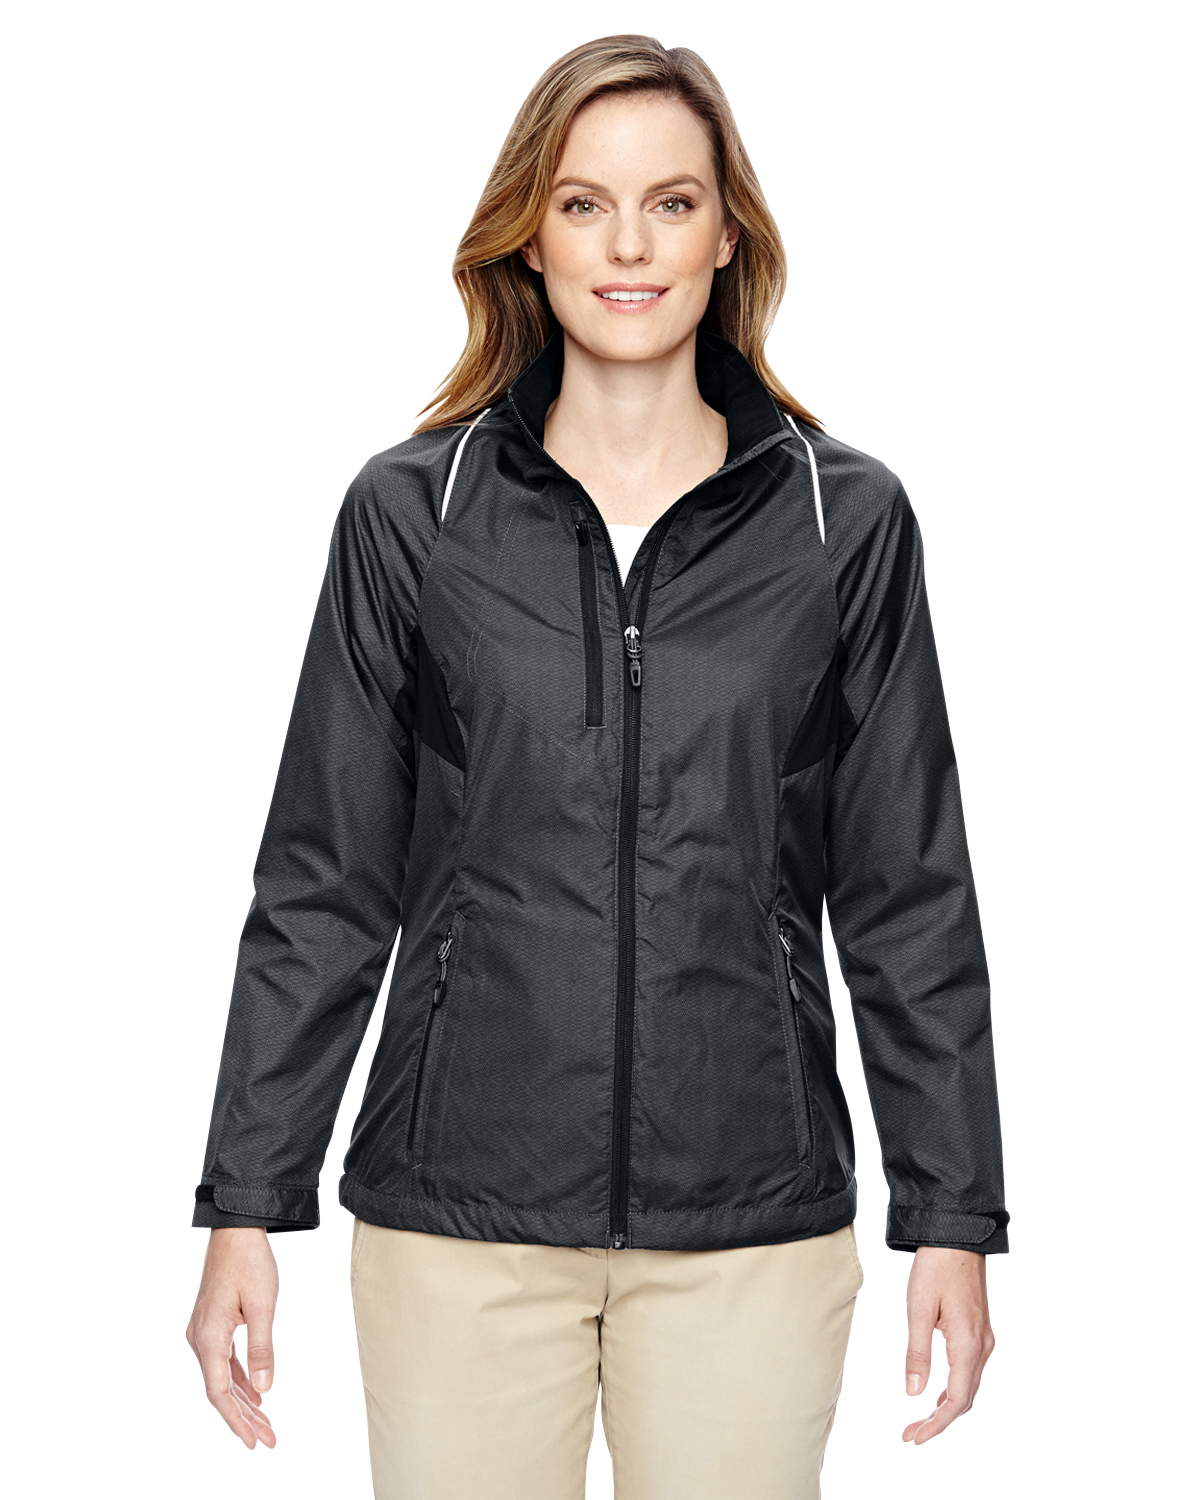 A Product of Ash City - North End Ladies' Sustain Lightweight Recycled Polyester Dobby Jacket with&nbsp;Print - CARBON 456 - S [Saving and Discount on bulk, Code Christo] - image 1 of 2